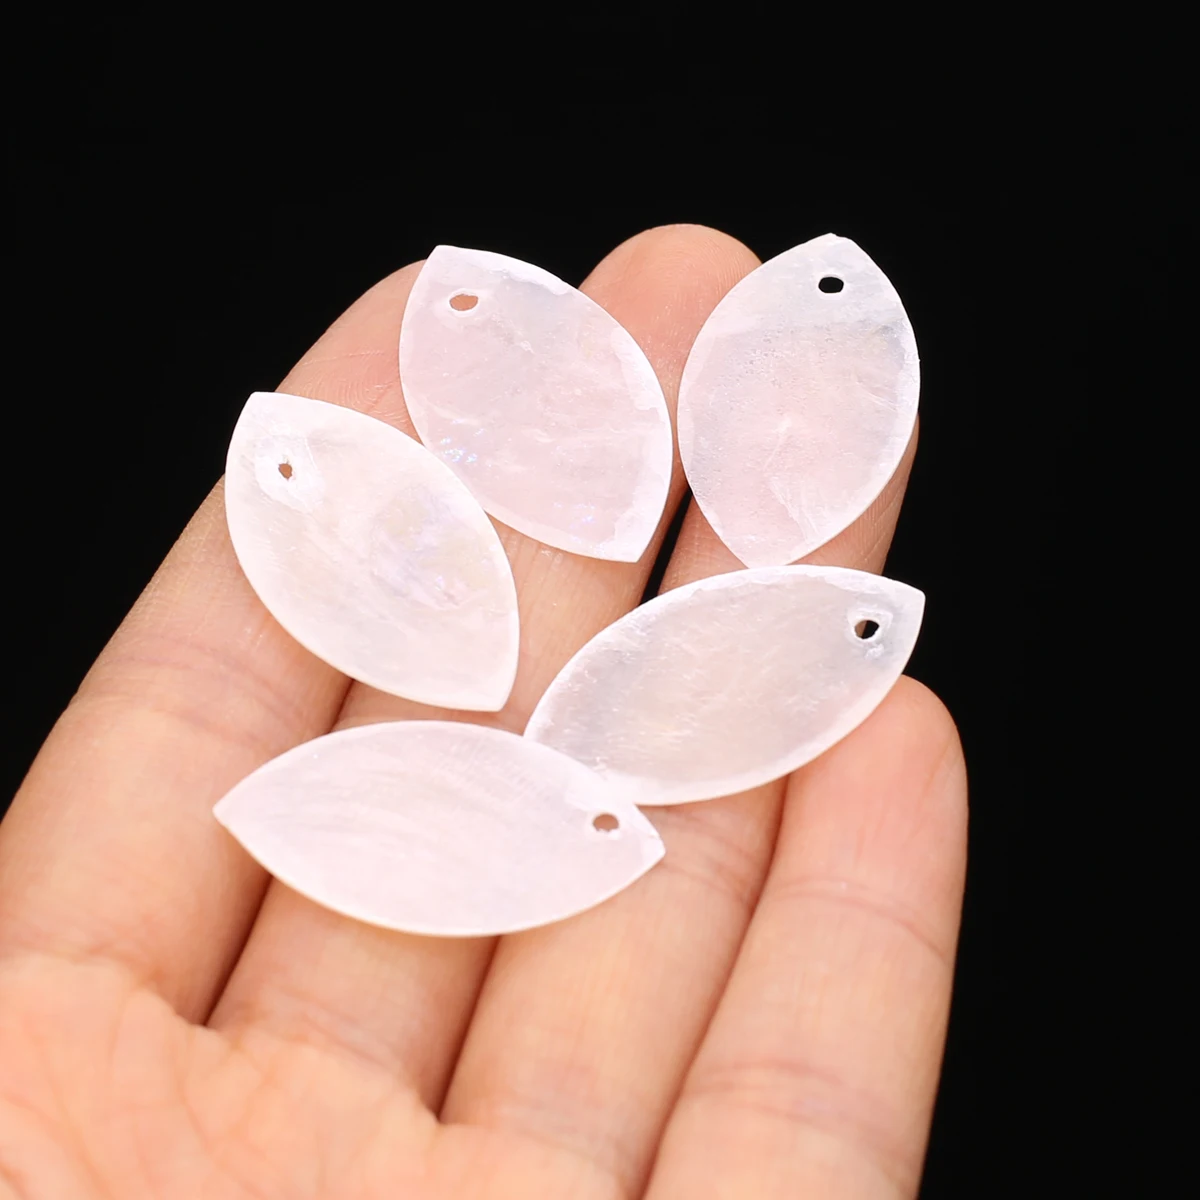 Купи Marquise Natural Thin Shell Beads Mother of Pearl Shells Loose Beads for Jewelry Making DIY Necklace Earring Accessories Crafts за 119 рублей в магазине AliExpress